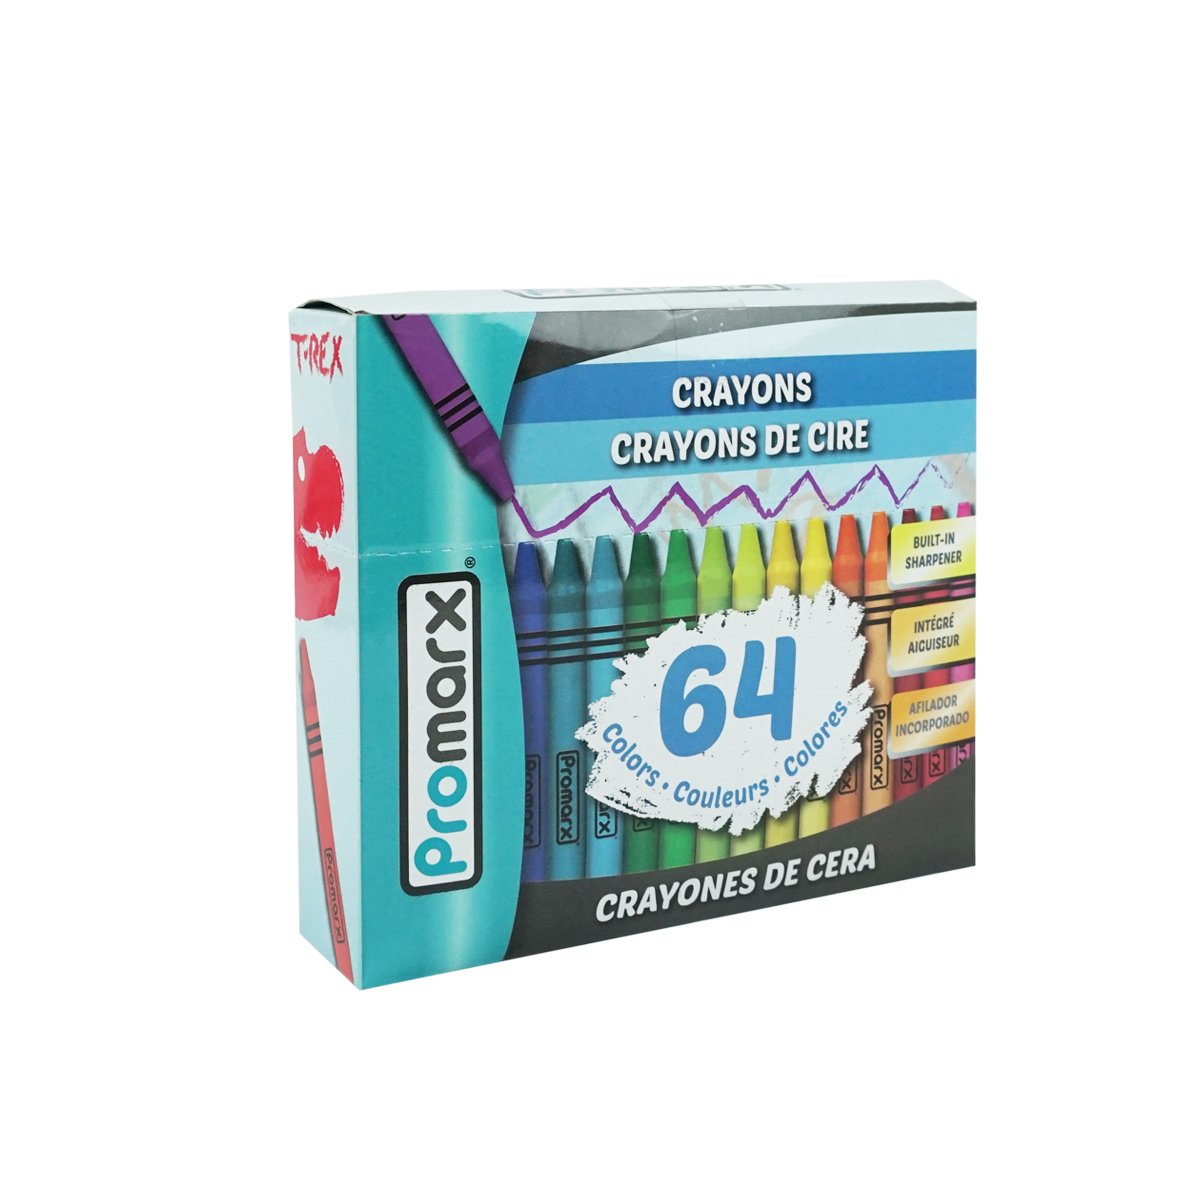  Crayola Crayons Bulk, 24 Crayon Packs with 24 Assorted Colors,  School Supplies : Everything Else